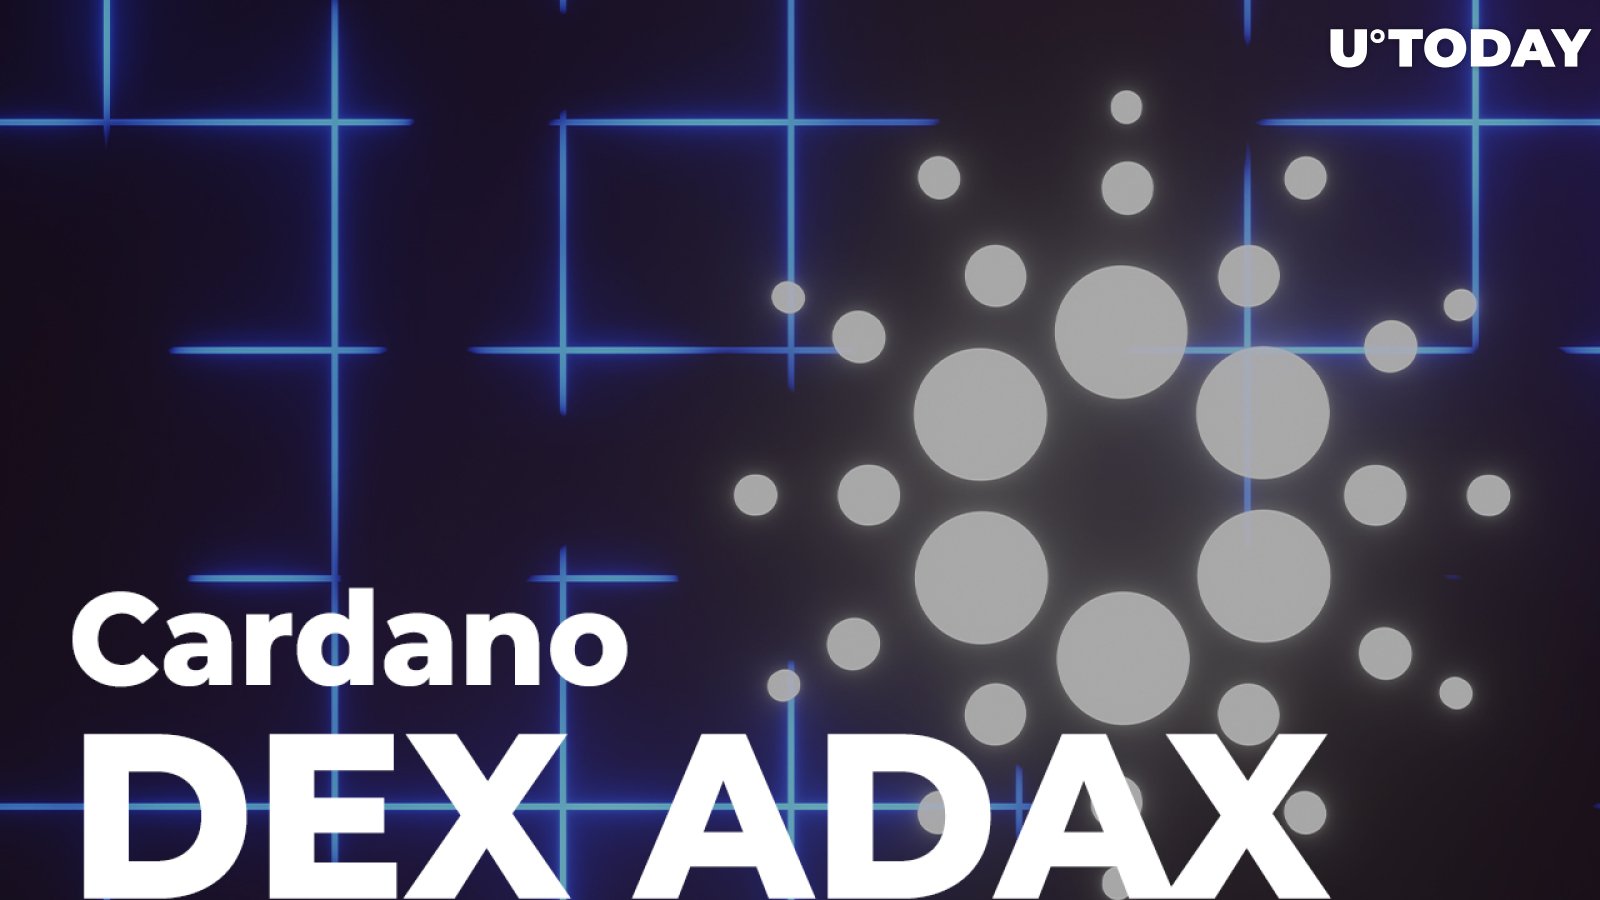 Cardano DEX ADAX Goes Live as One of First Decentralized Exchanges on Network